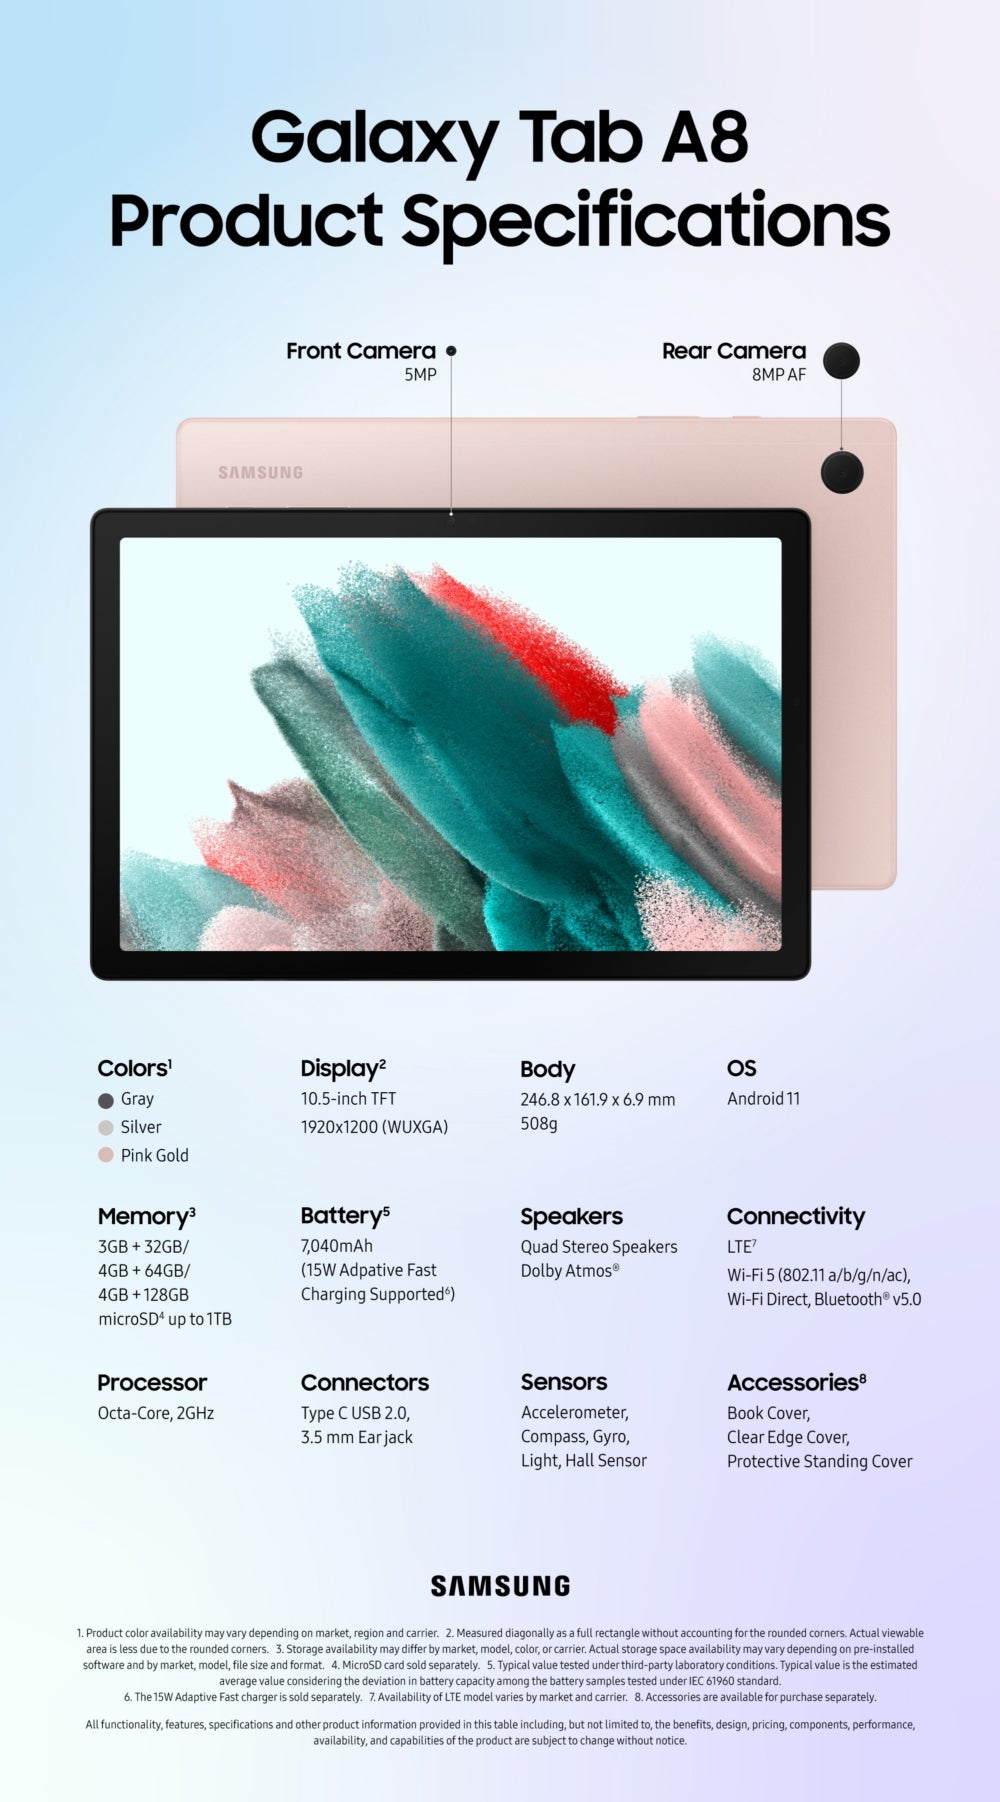 Galaxy Tab A8 infographic - Samsung makes the Galaxy Tab A8 official; 10.5-inch tablet to be released in the U.S. next month